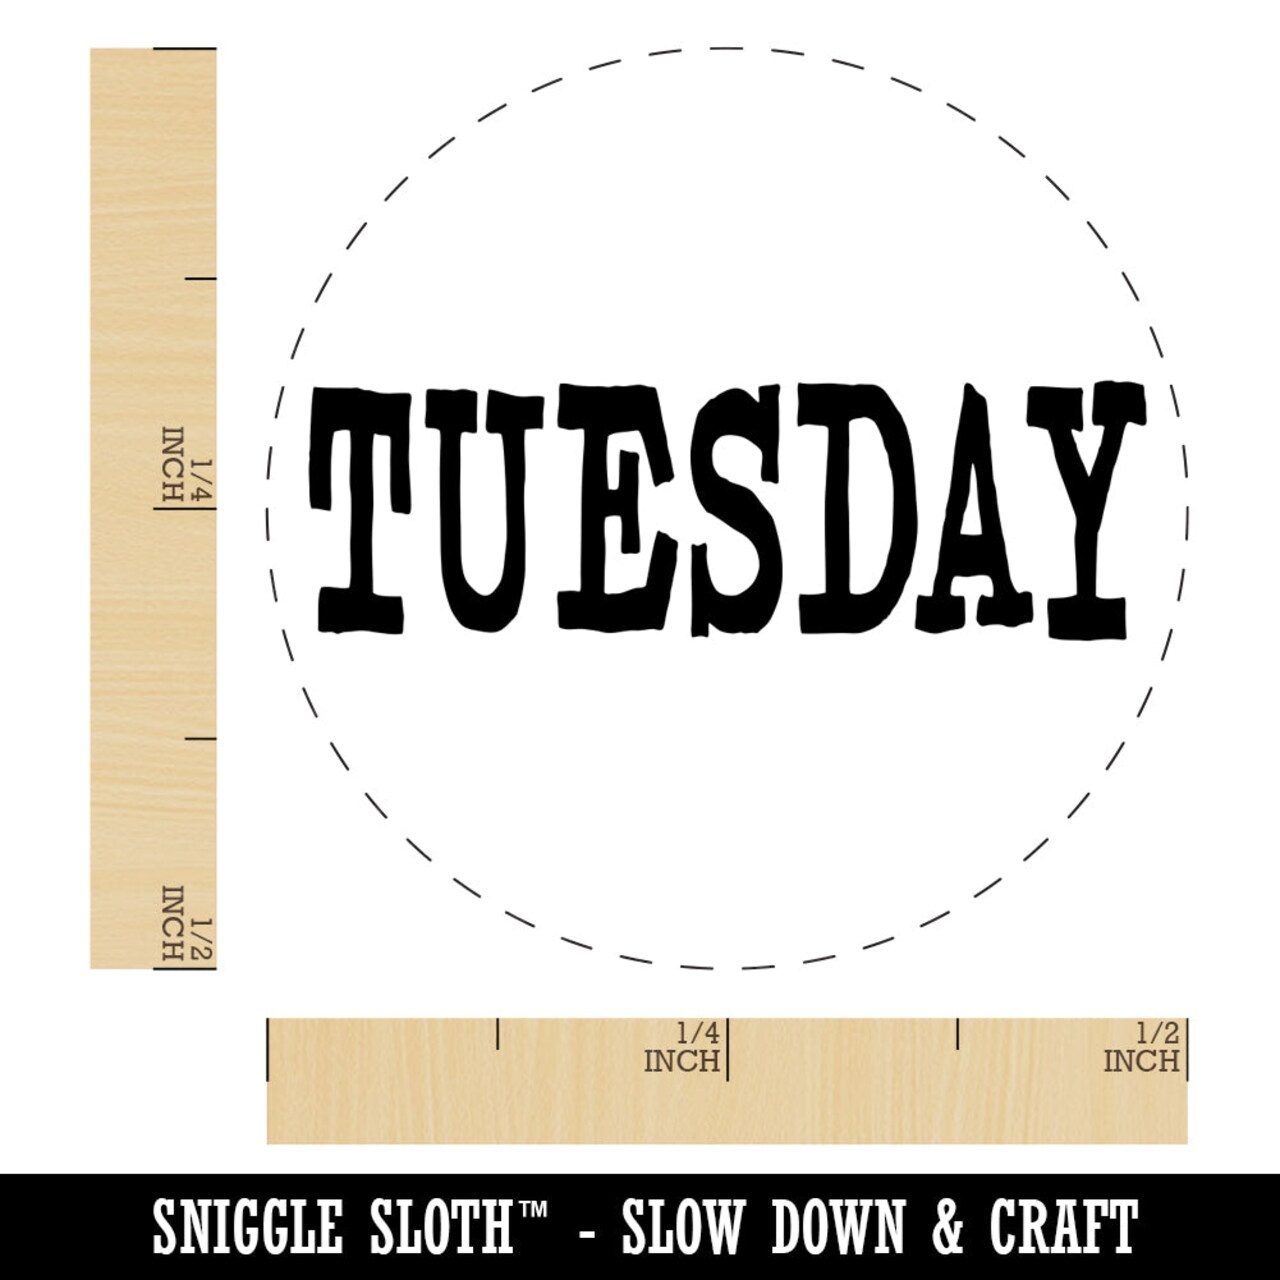 Tuesday Text Self-Inking Rubber Stamp for Stamping Crafting Planners